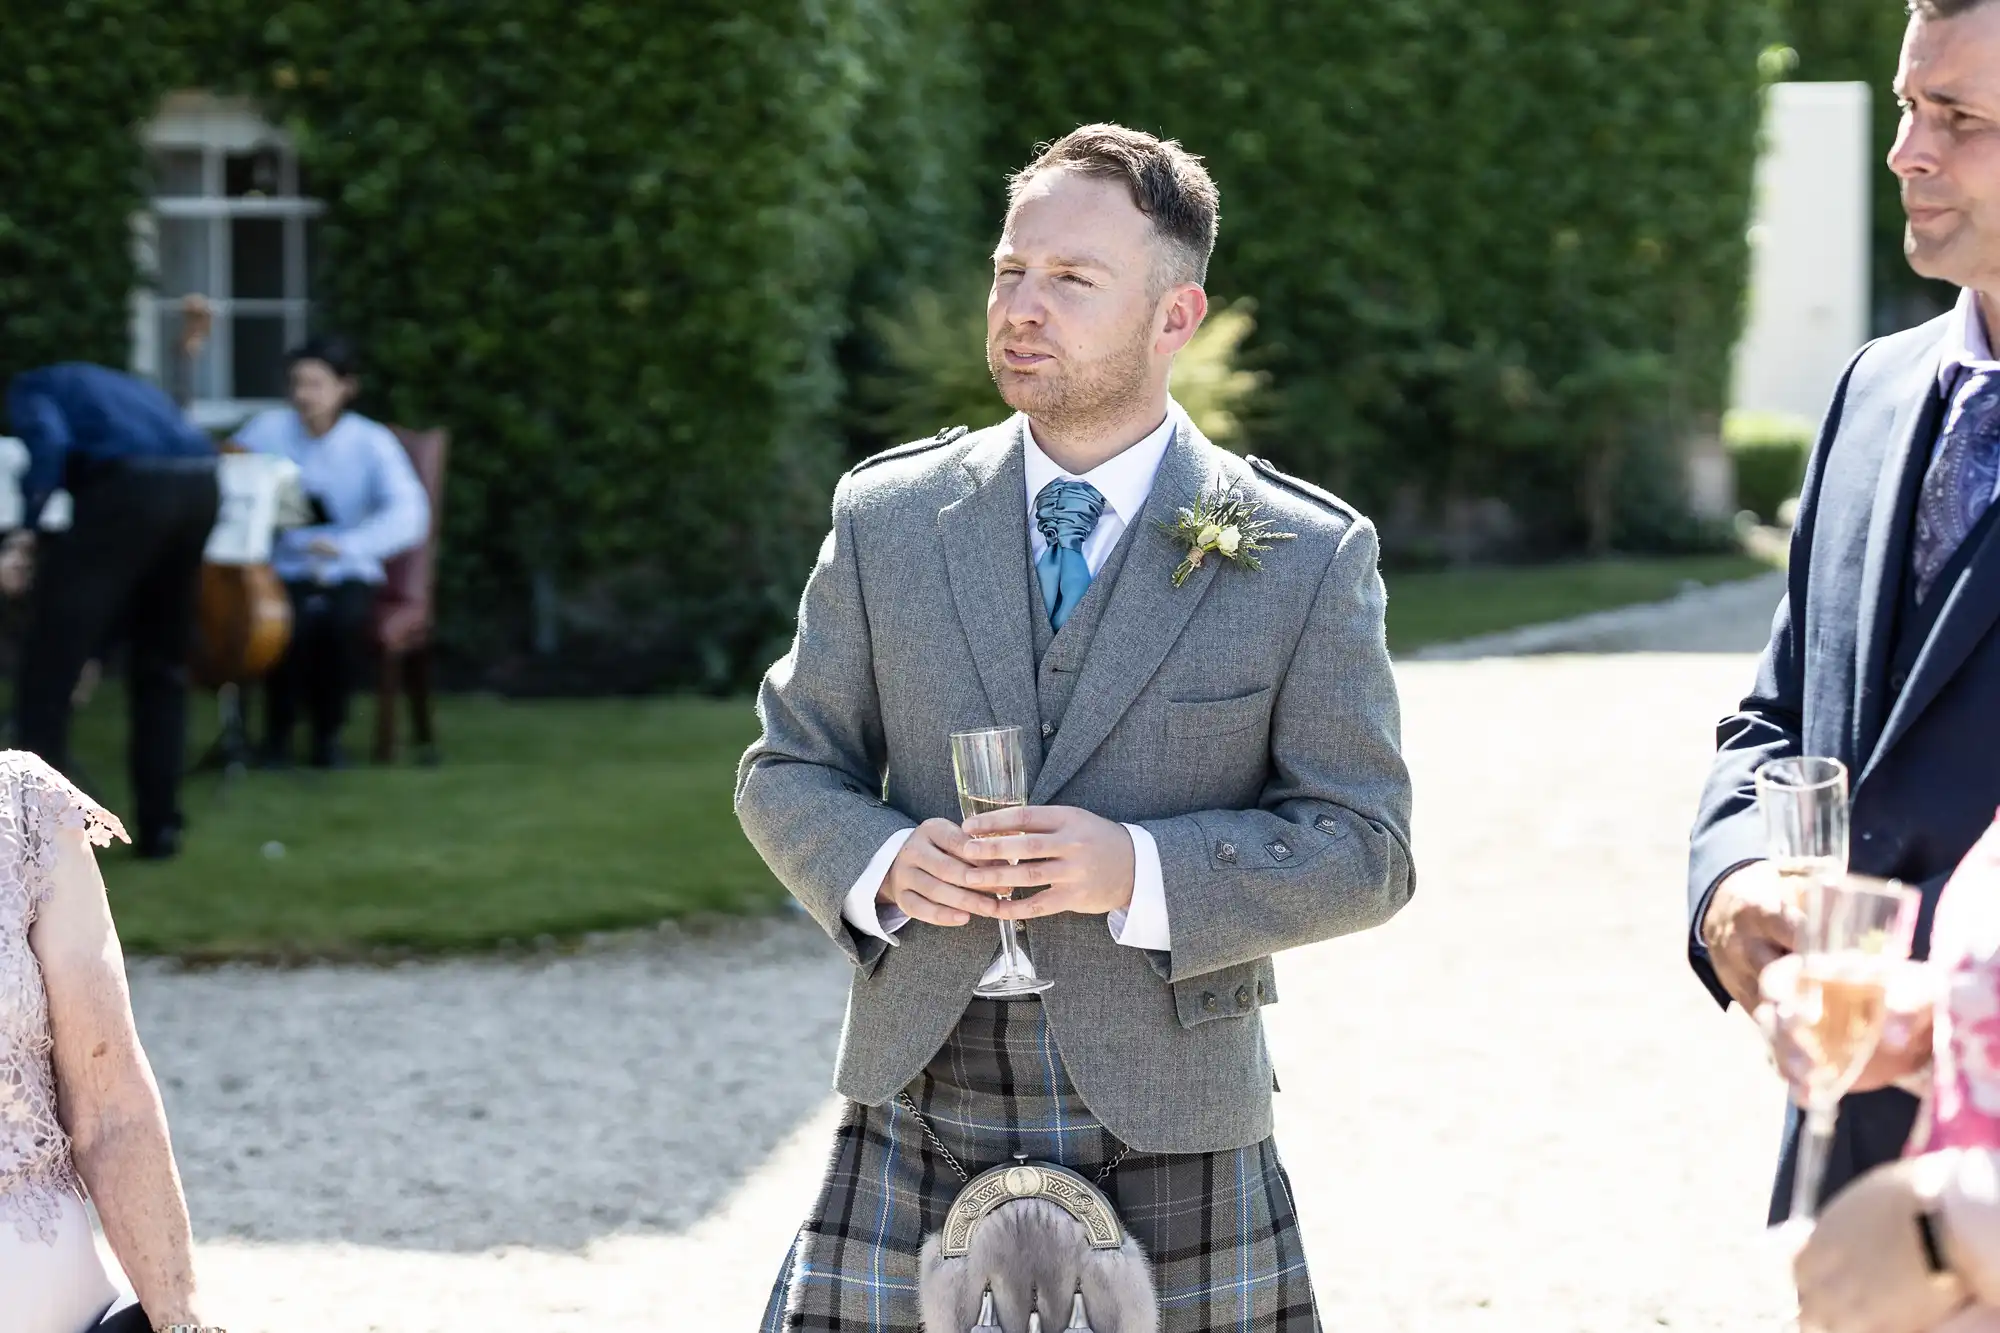 A man in a traditional scottish kilt and tweed jacket holds a champagne glass at a sunny outdoor wedding reception.